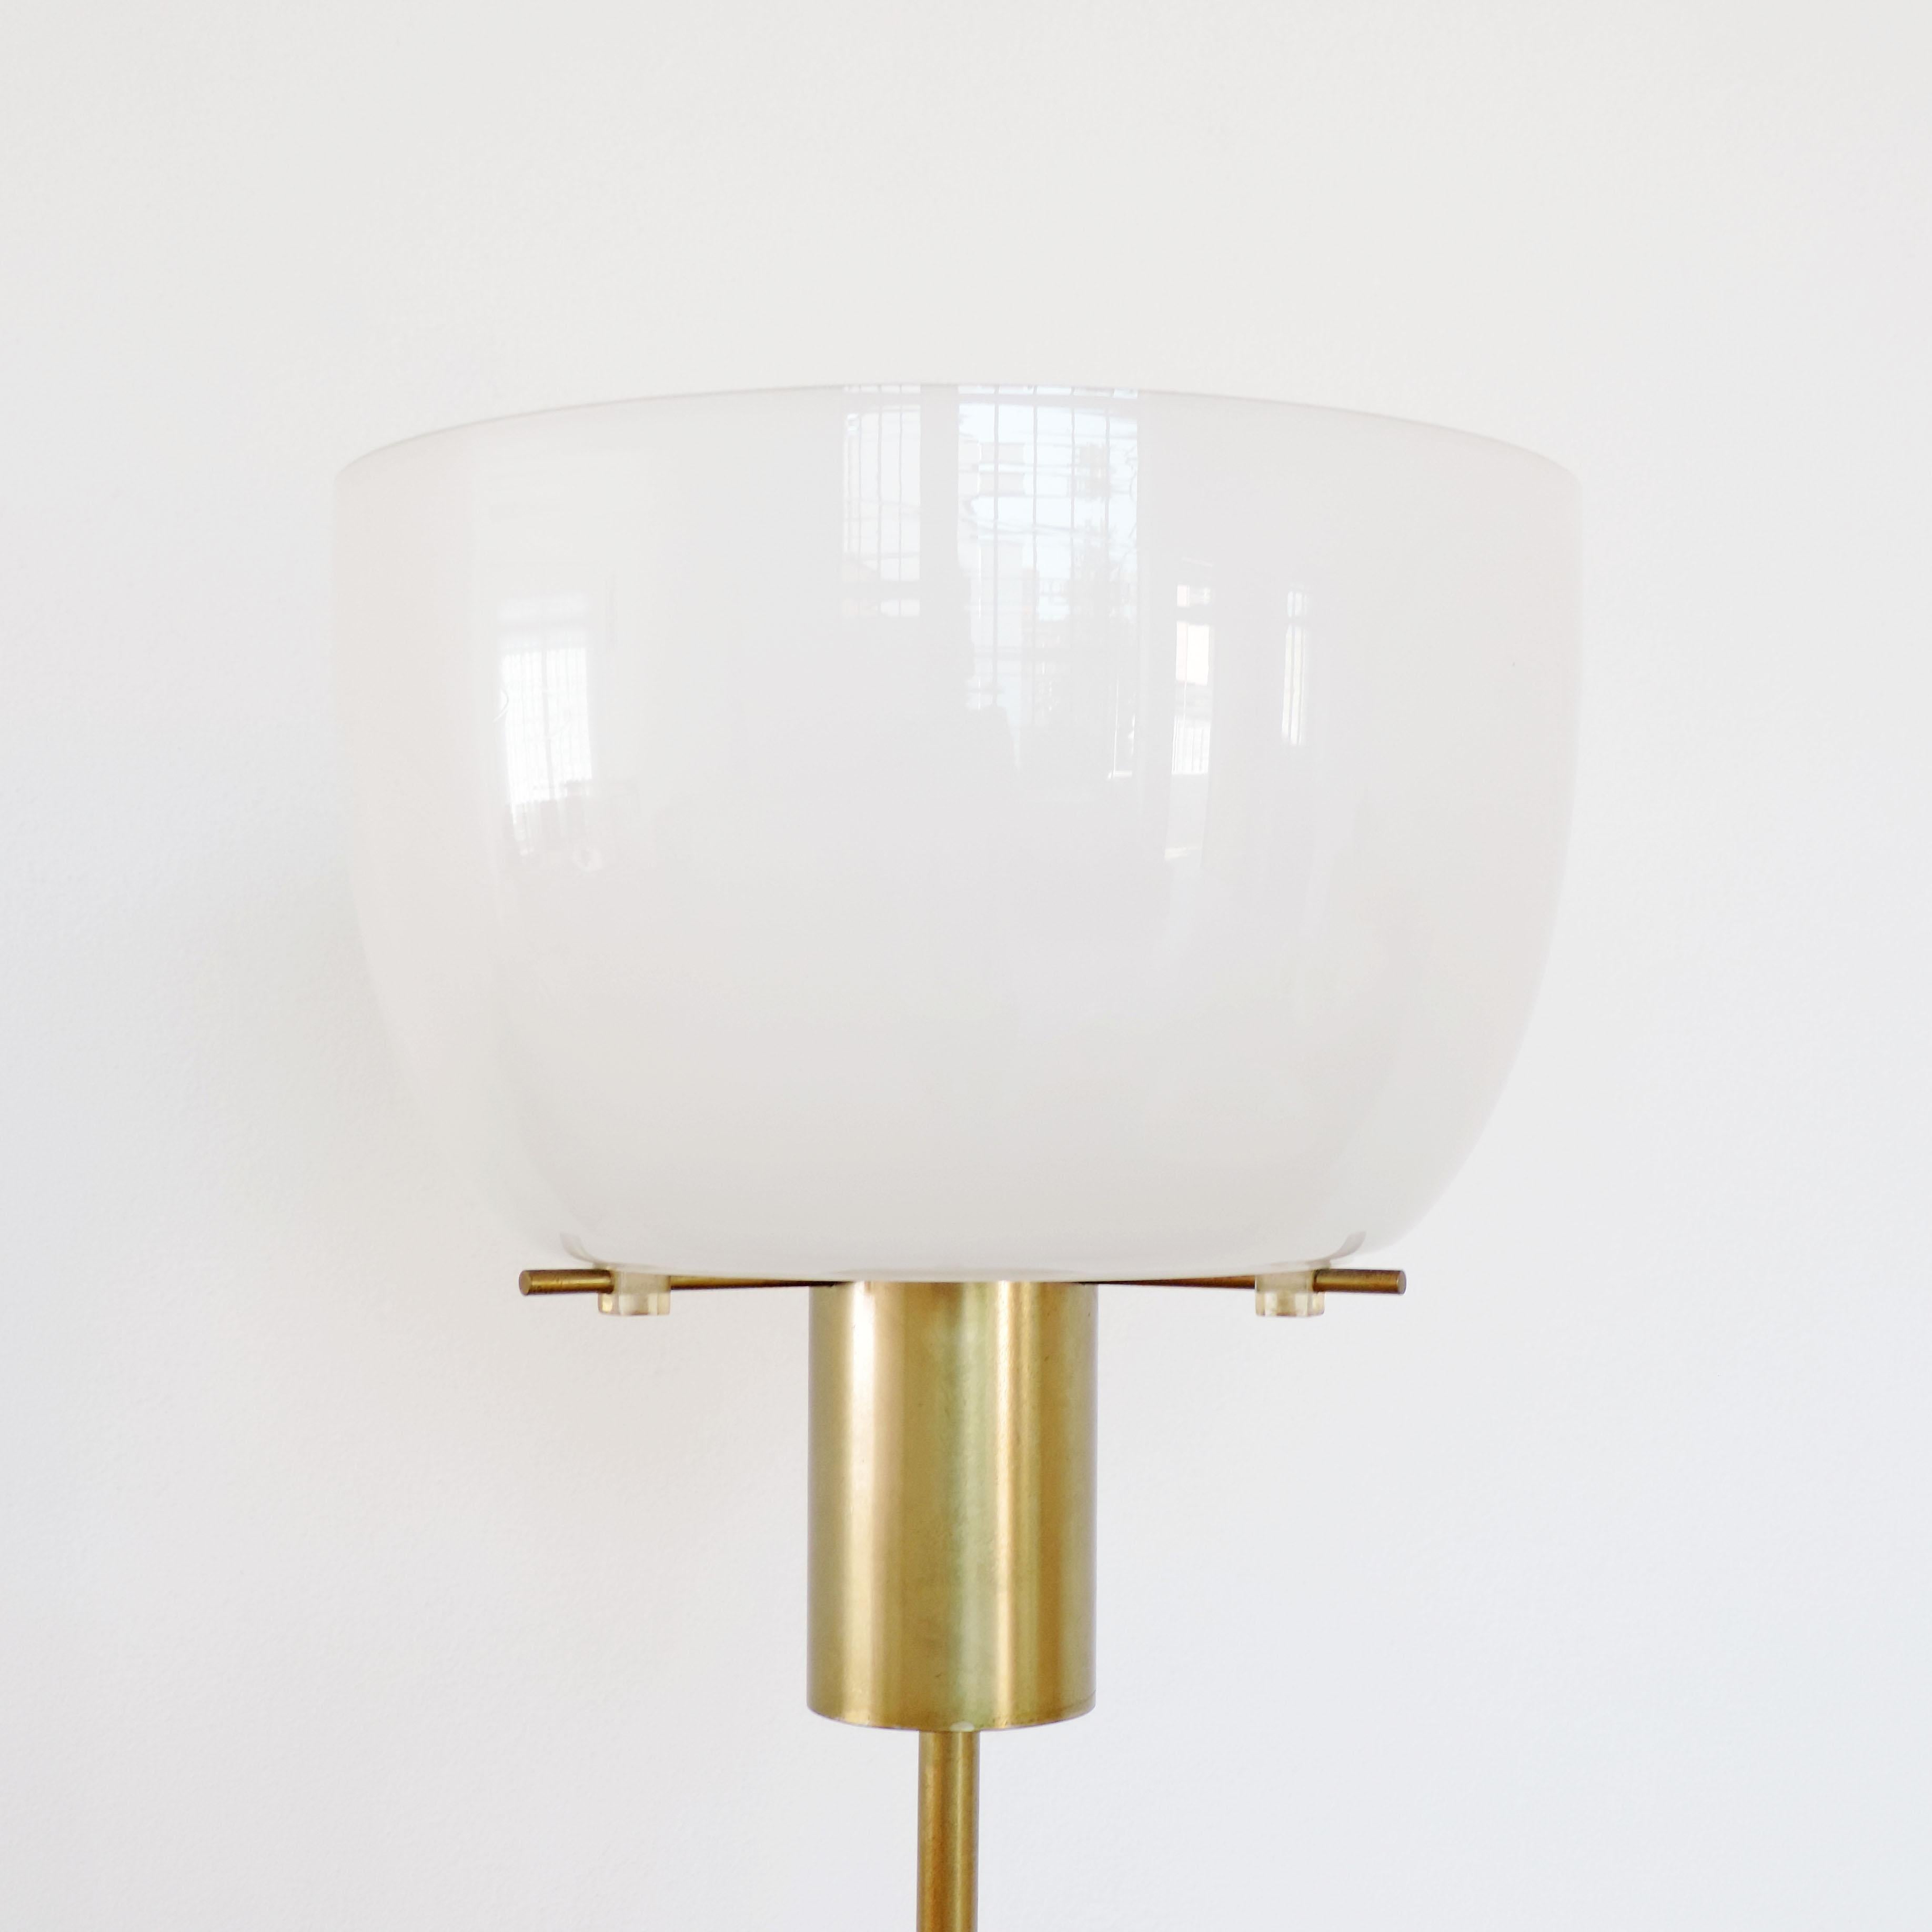 A rare Giuseppe Ostuni for O'luce floor lamp, Italy 1960s.
When the lamp is lit the orange plexiglass gives warmth to the light.